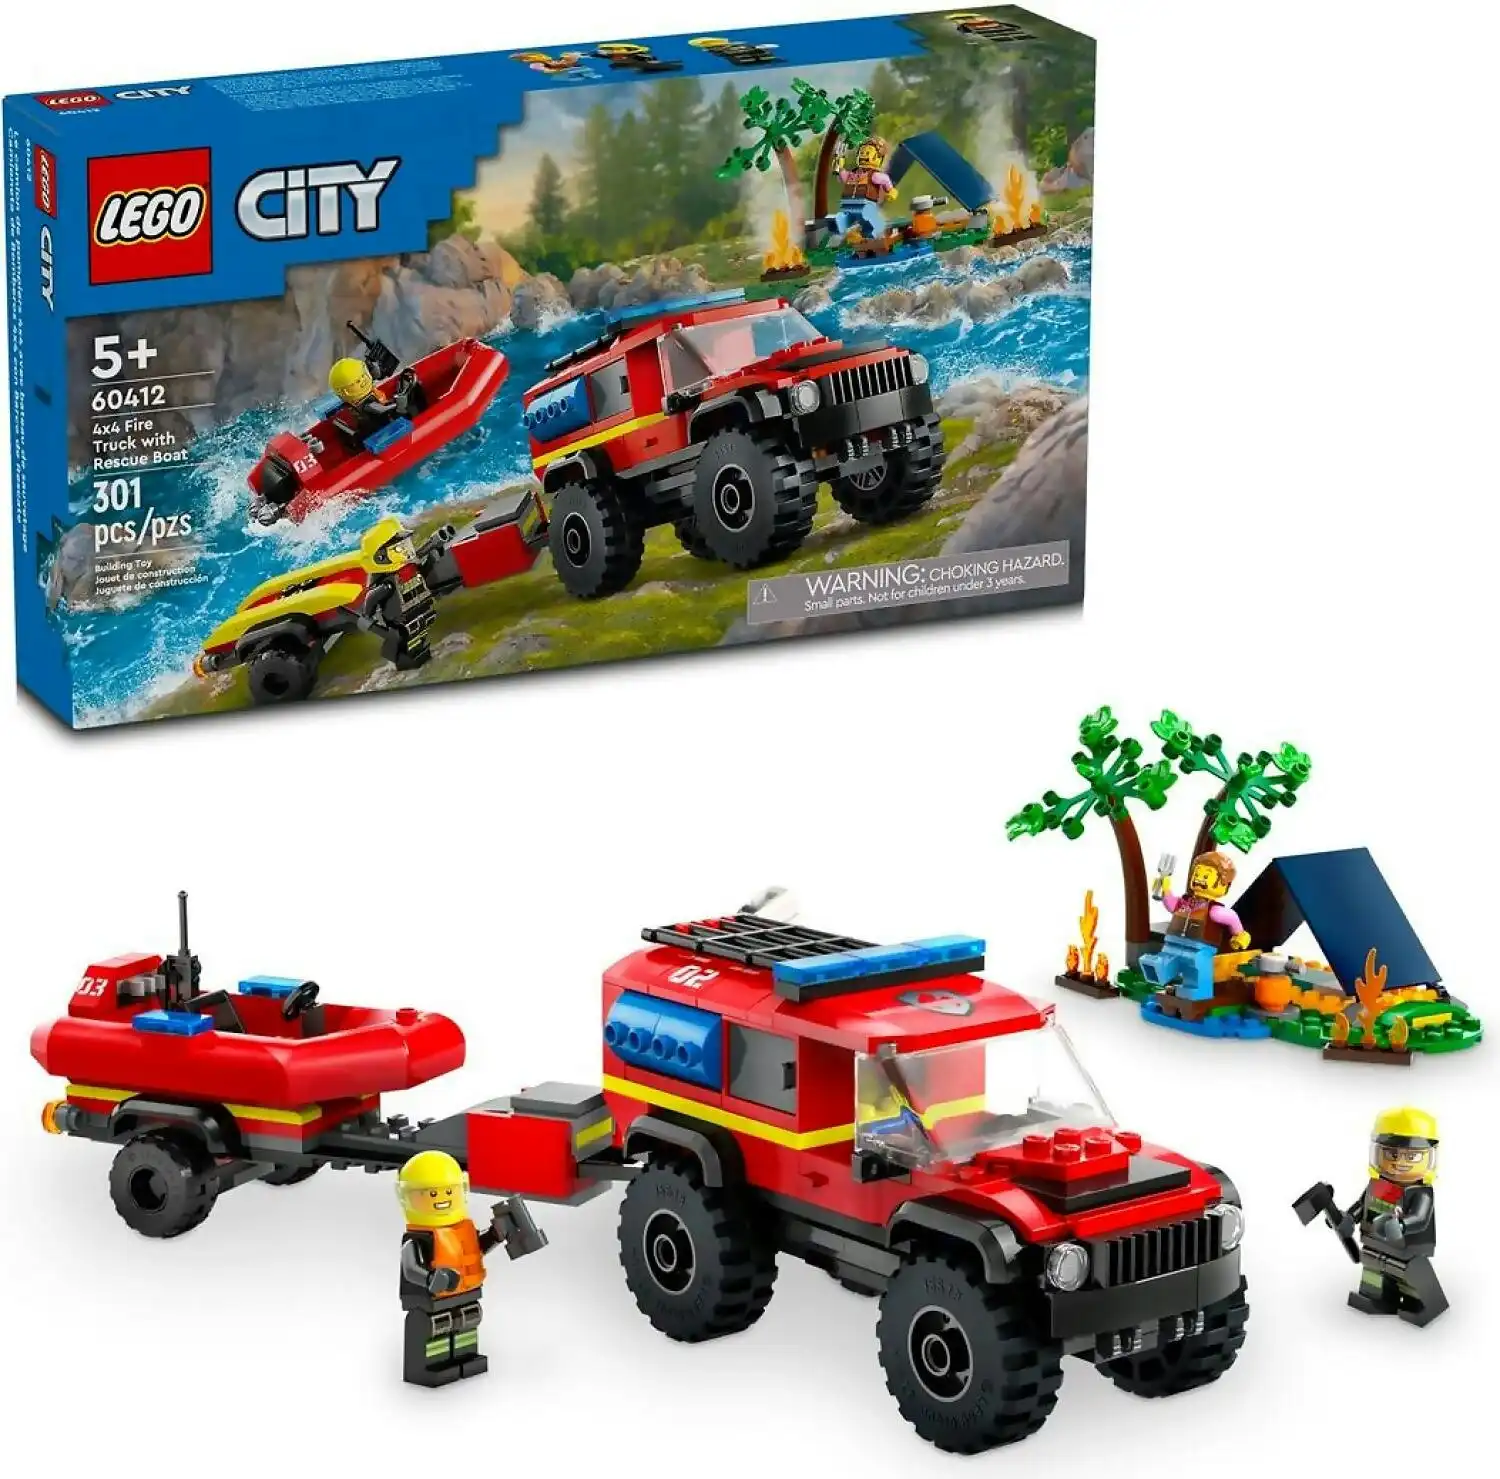 LEGO 60412 4x4 Fire Truck with Rescue Boat - City